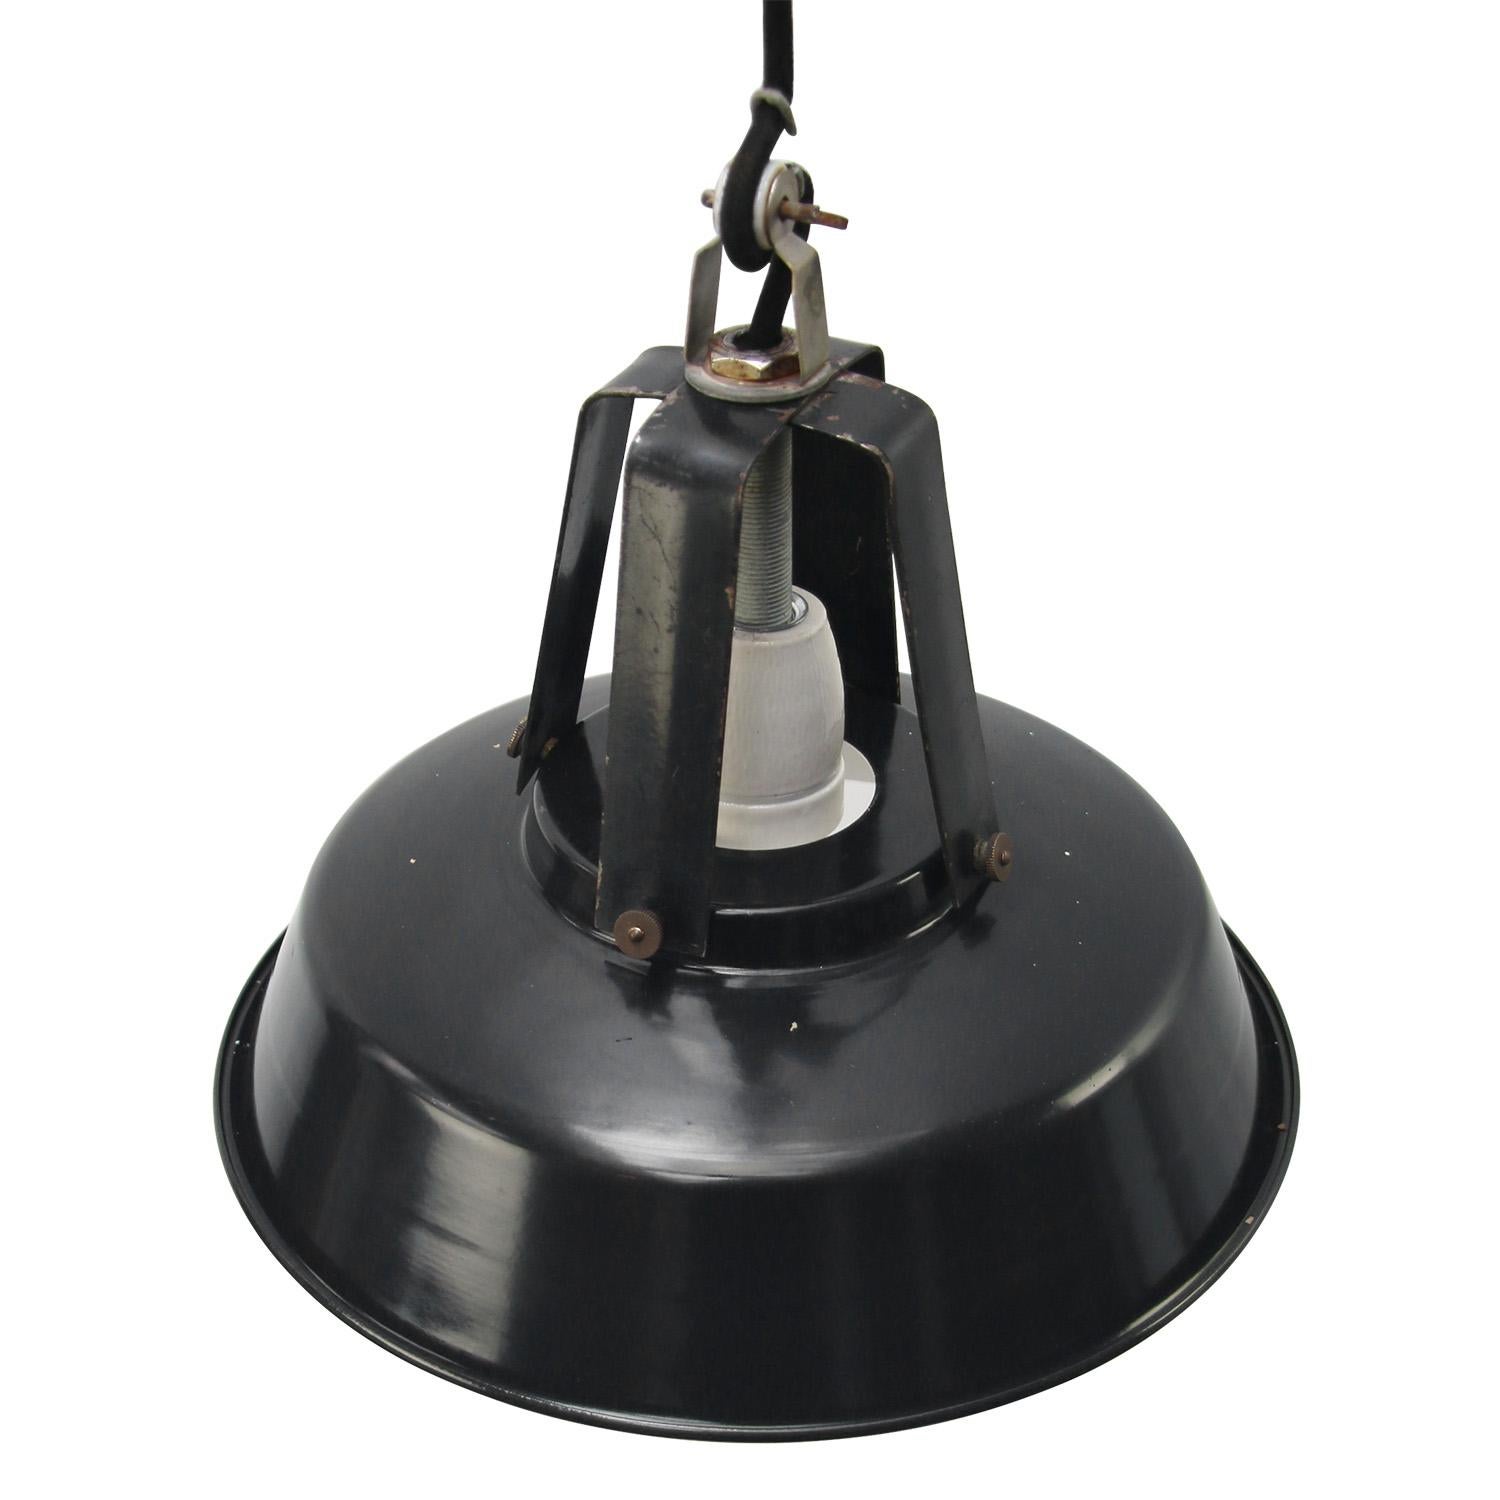 French factory light.
Black iron top with enamel shade.
White inside.

Weight: 1.00 kg / 2.2 lb

Priced per individual item. All lamps have been made suitable by international standards for incandescent light bulbs, energy-efficient and LED